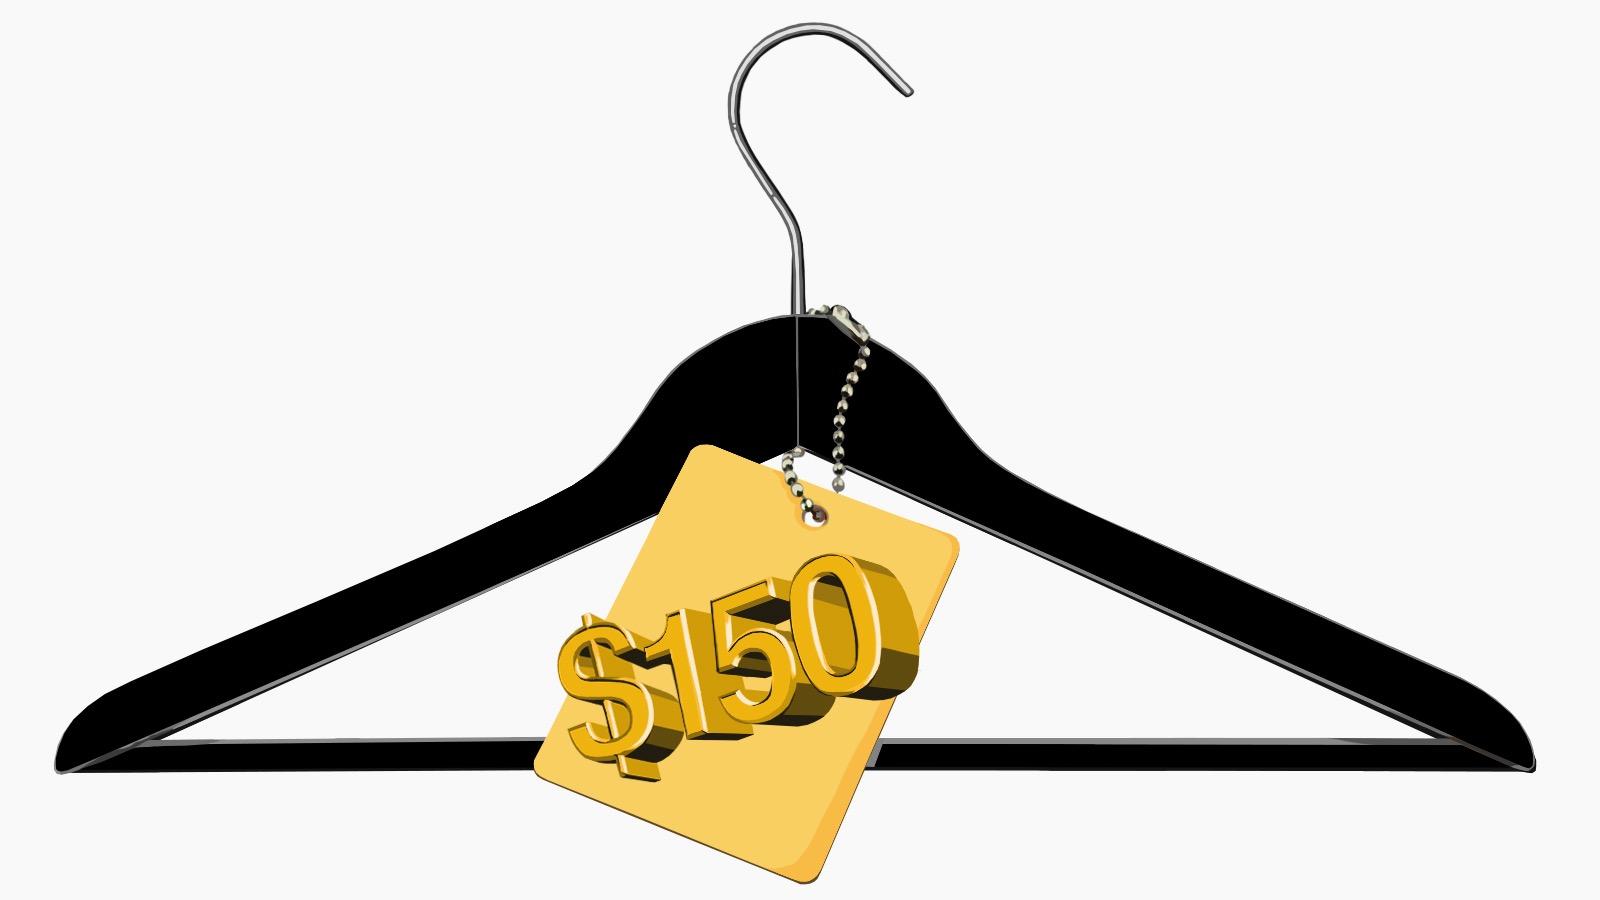 Expensive Clothes Logo - Your next item of clothing should be so expensive it hurts